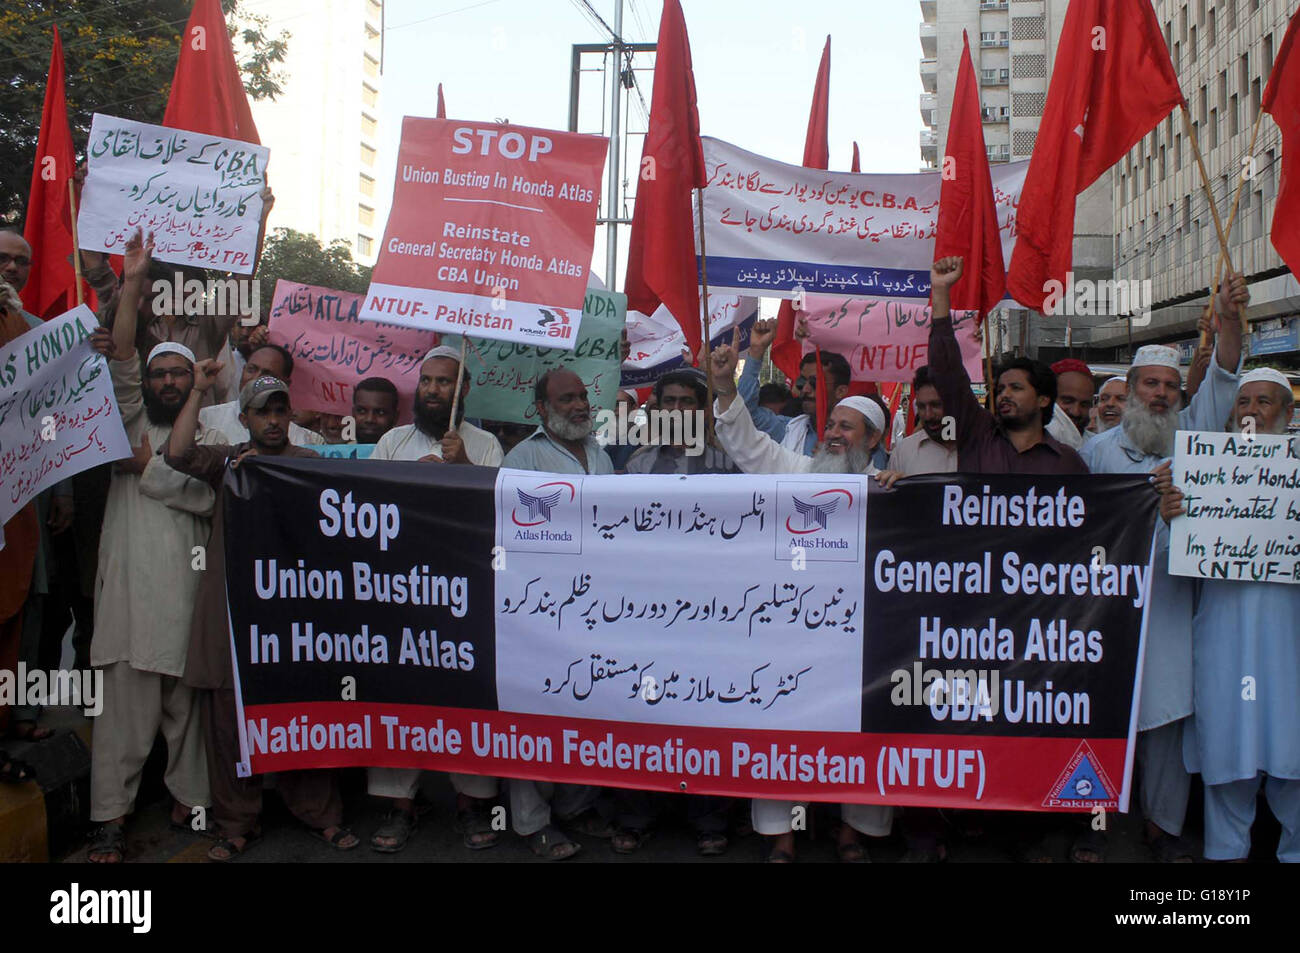 Members of National Trade Union Federation Pakistan are holding a  demonstration against union busting in factories, during demonstration held  at Karachi press club on Wednesday, May 11, 2016. Credit: Asianet-Pakistan/Alamy  Live News